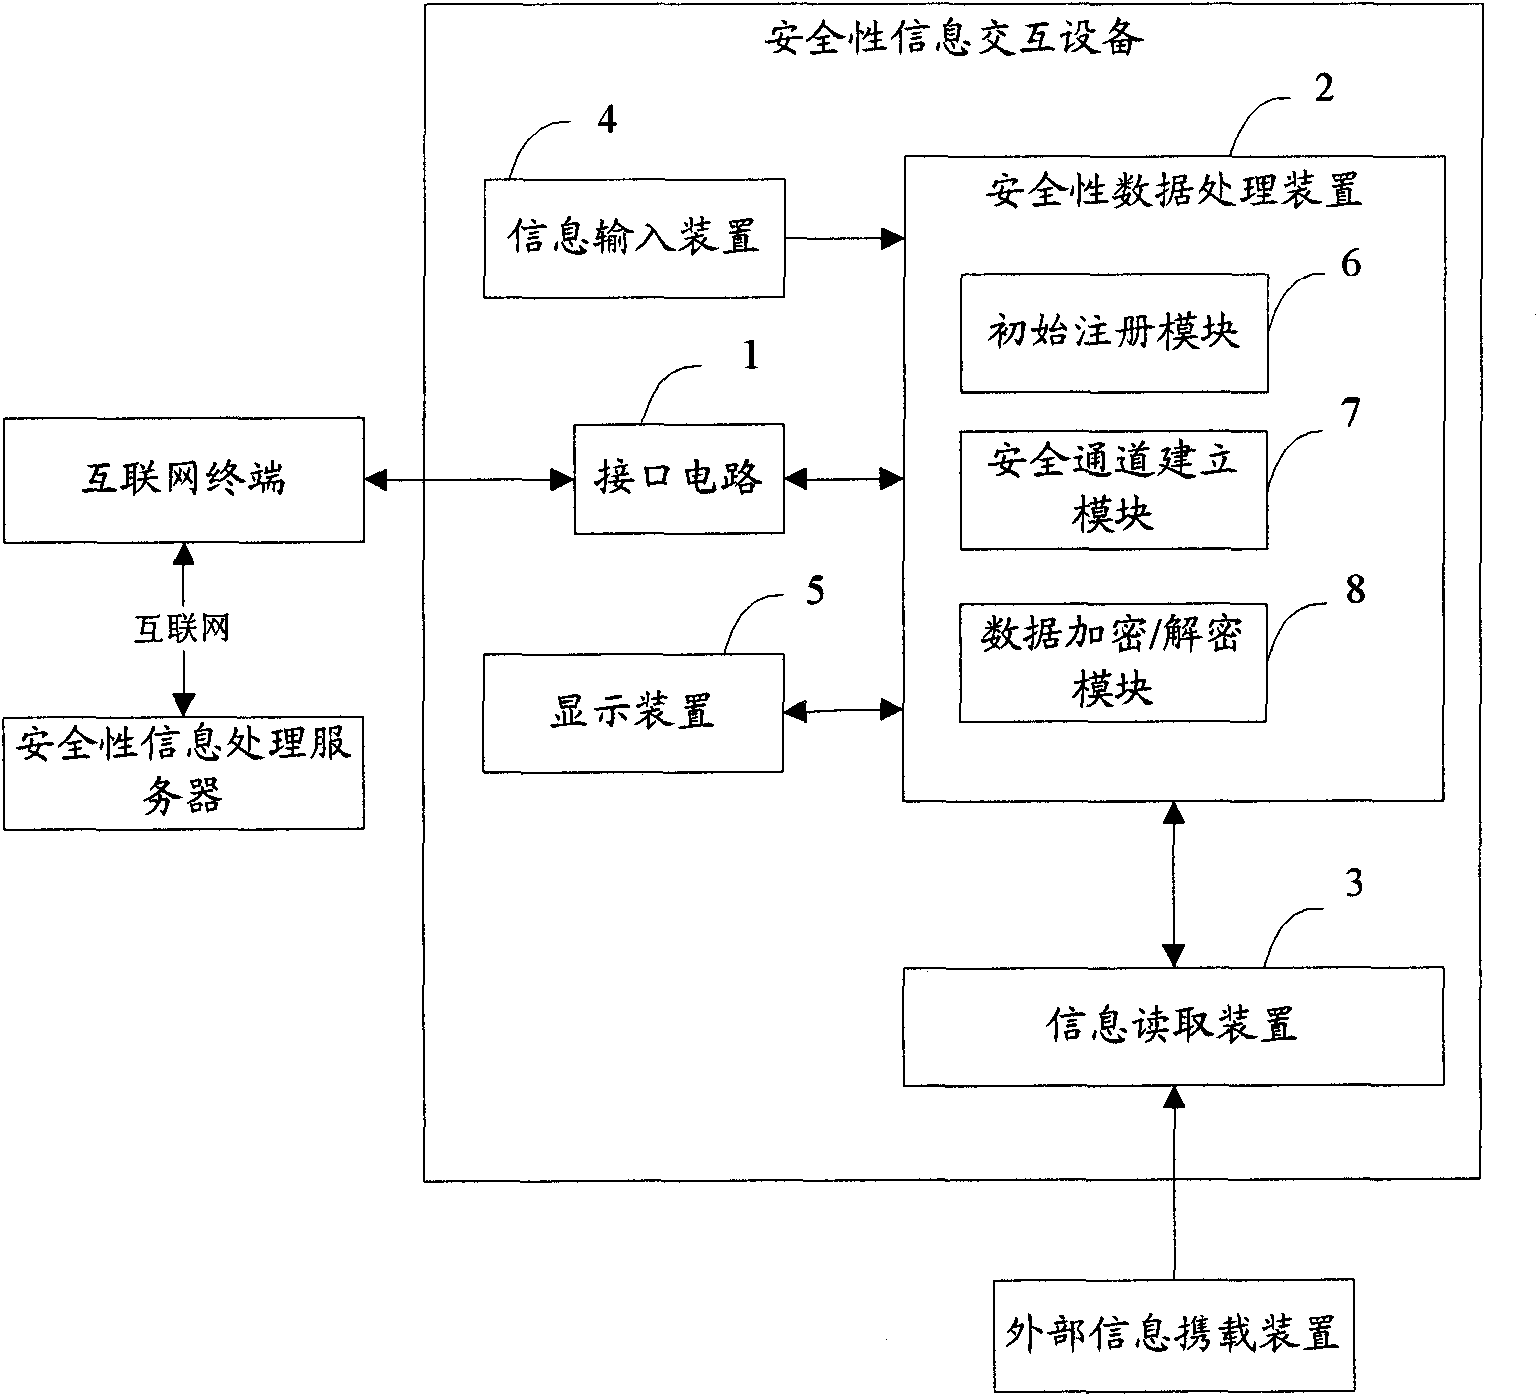 Internet-based device and method for security information interaction